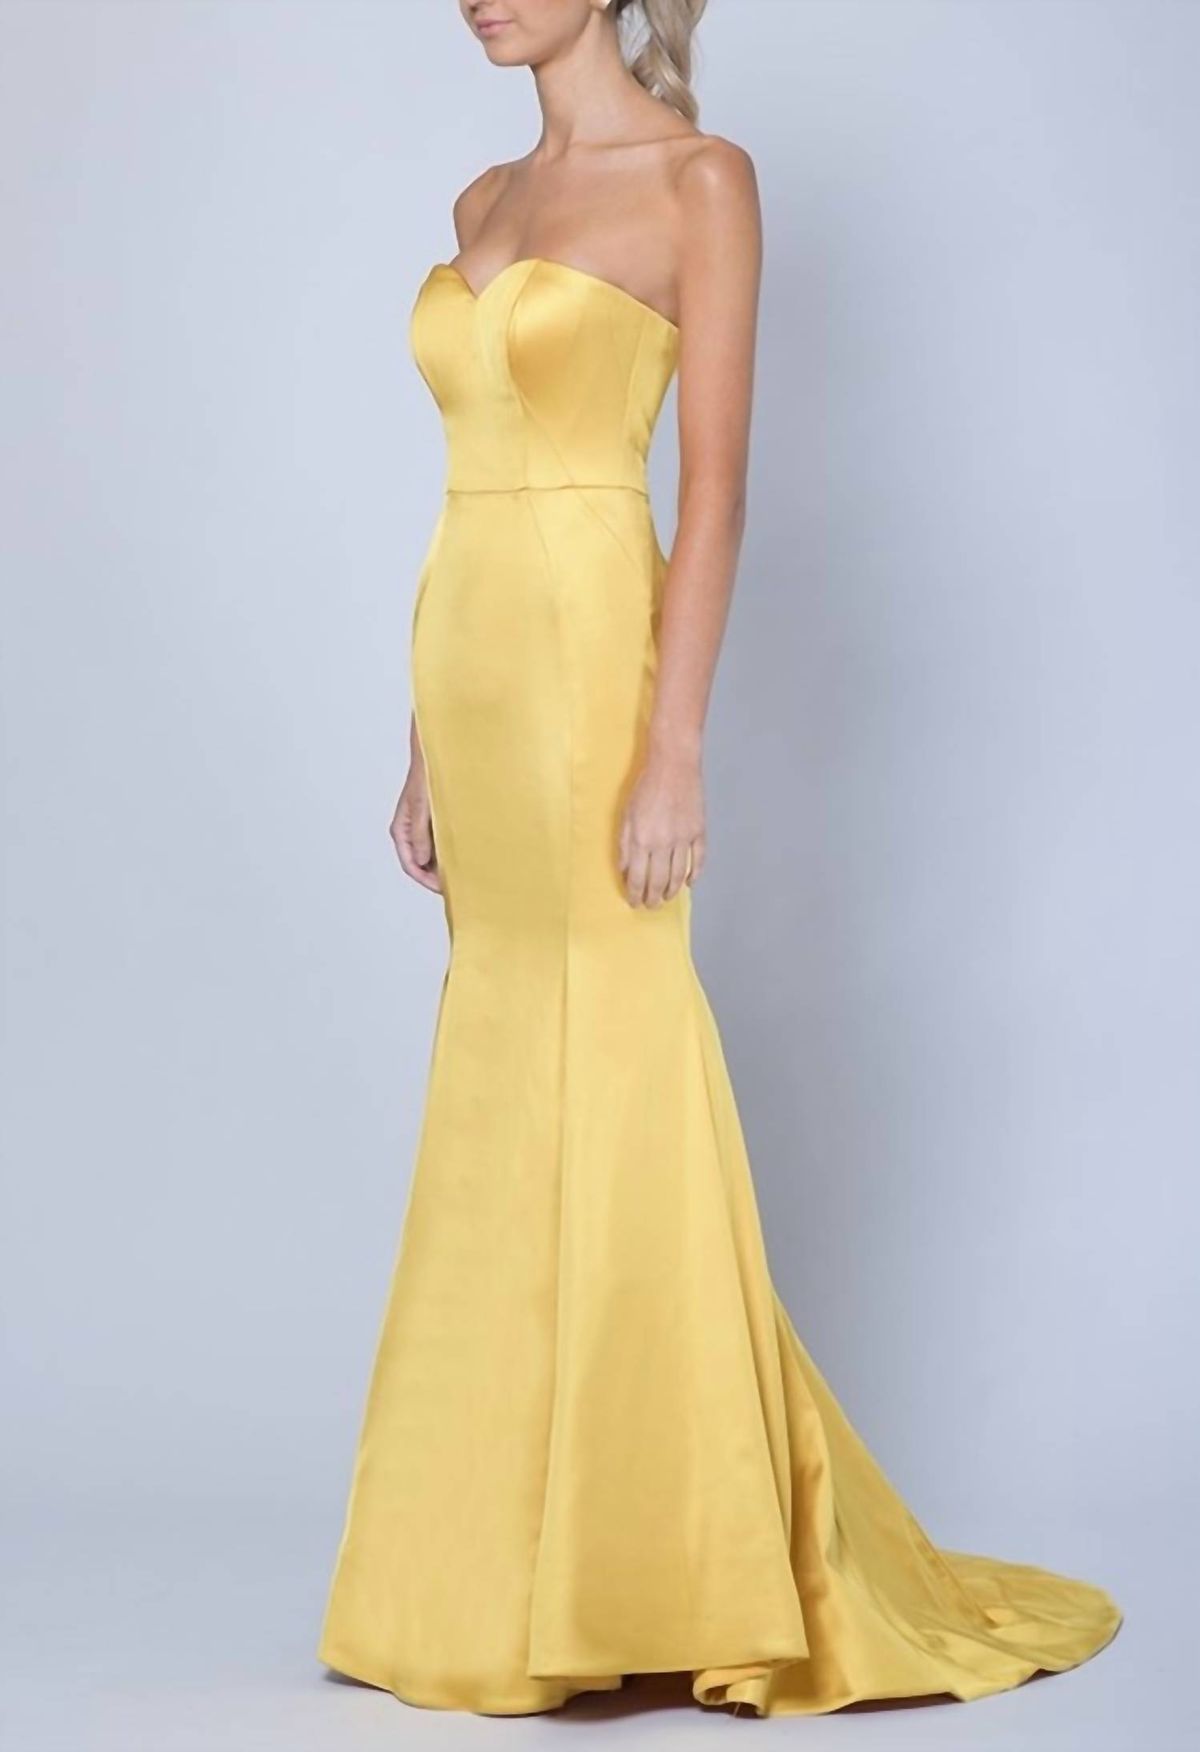 Style 1-2455955455-1498 Bariano Size 4 Prom Strapless Yellow Mermaid Dress on Queenly